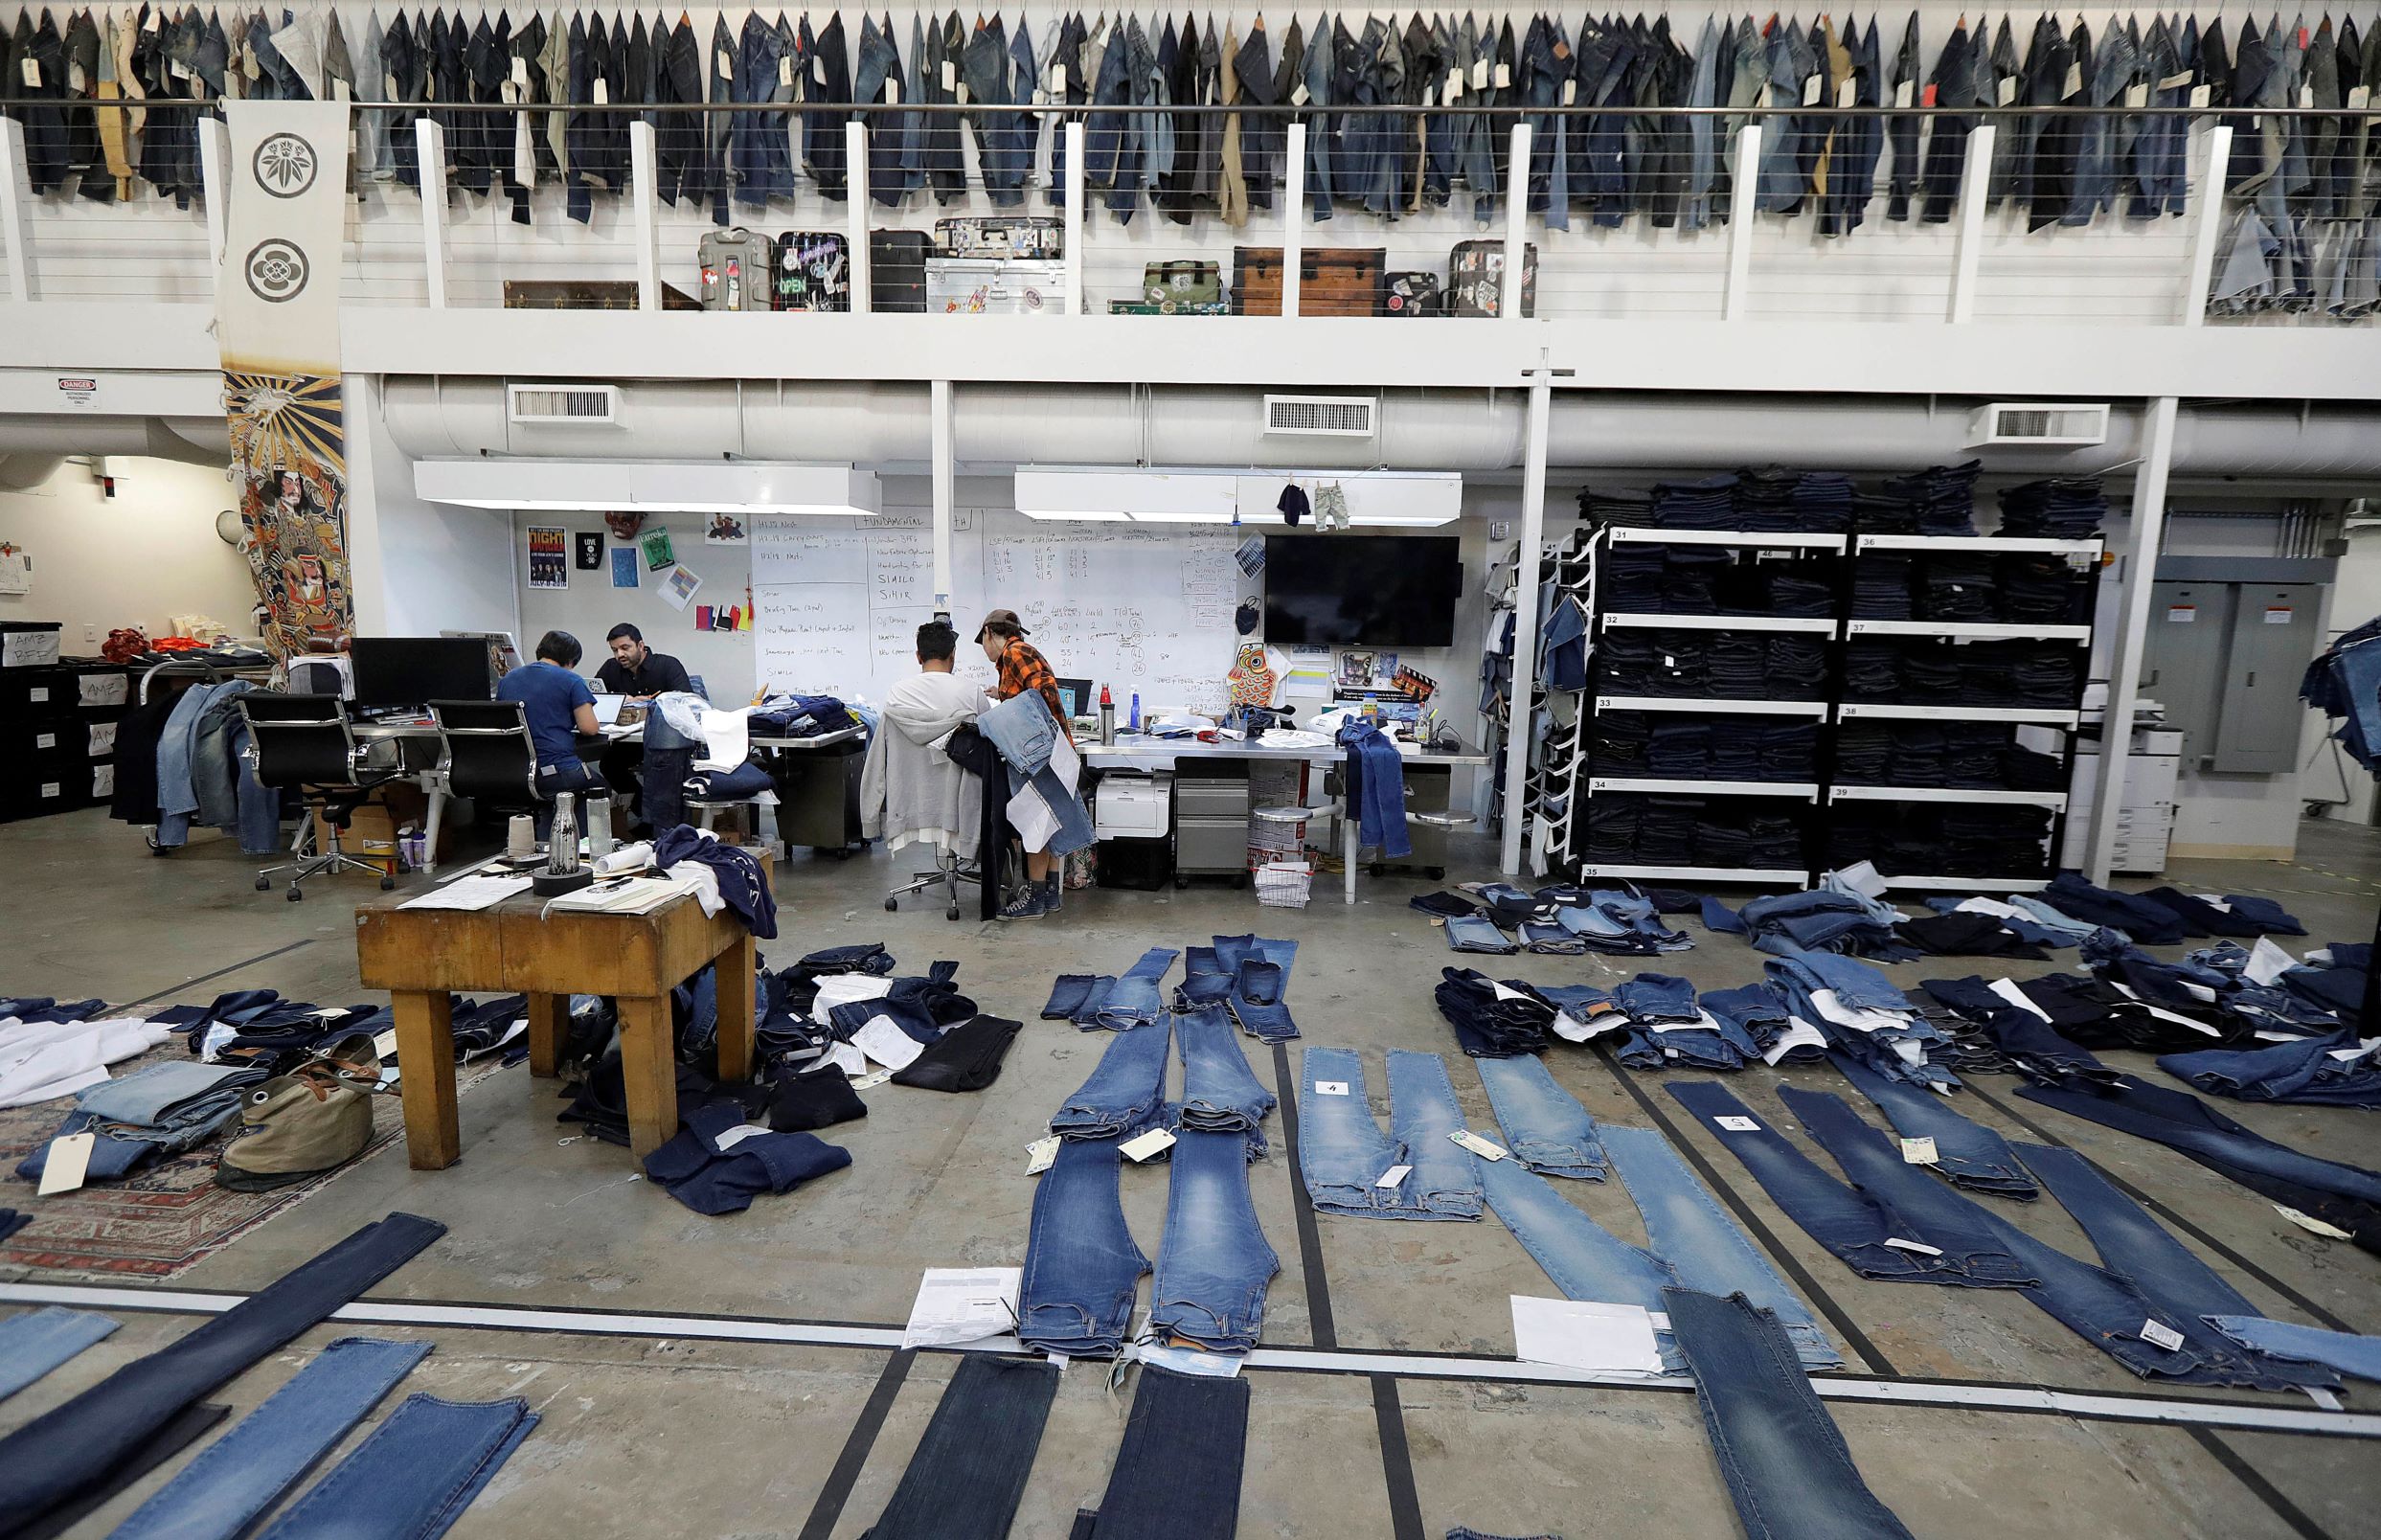 Several pairs of jeans are laid out on the floor of an open studio work space.